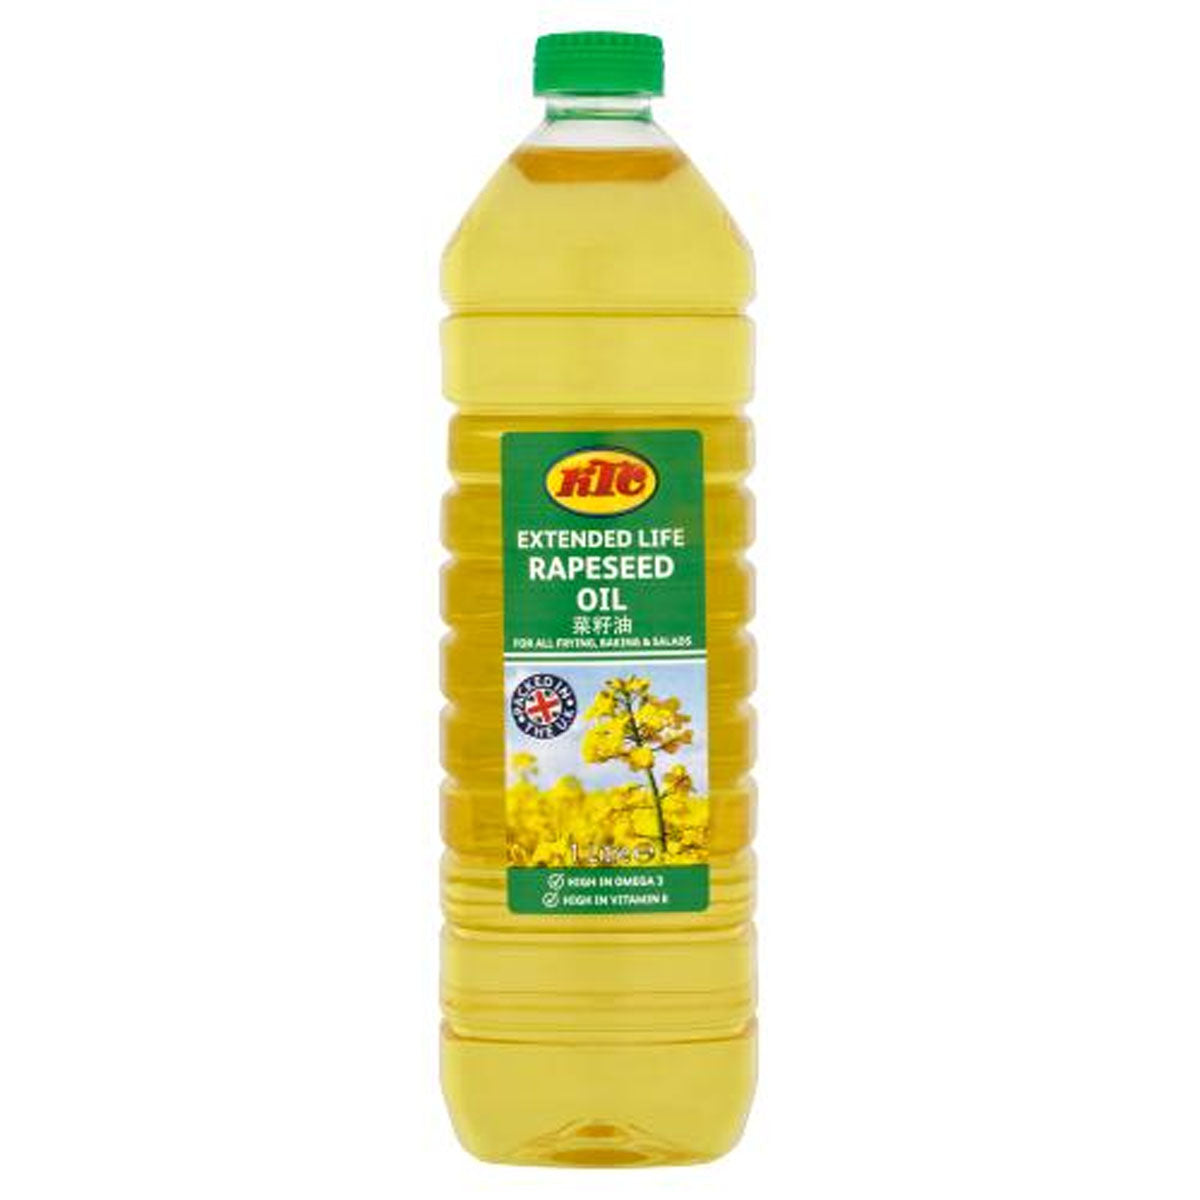 KTC - Extended Life Rapeseed Oil - 1L - Continental Food Store